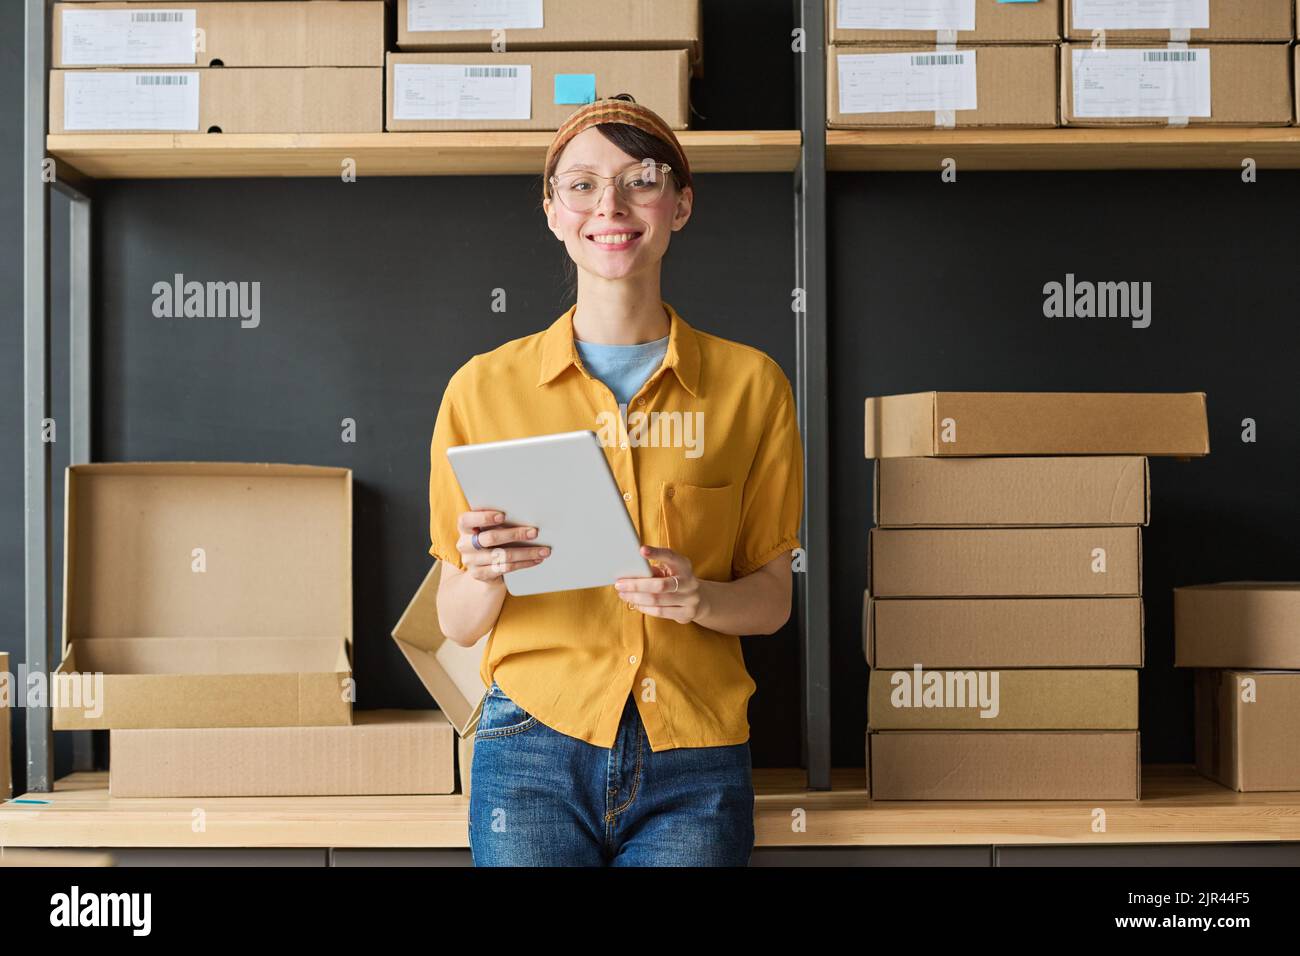 Portrait of young woman smiling at camera while using digital tablet in warehouse Stock Photo